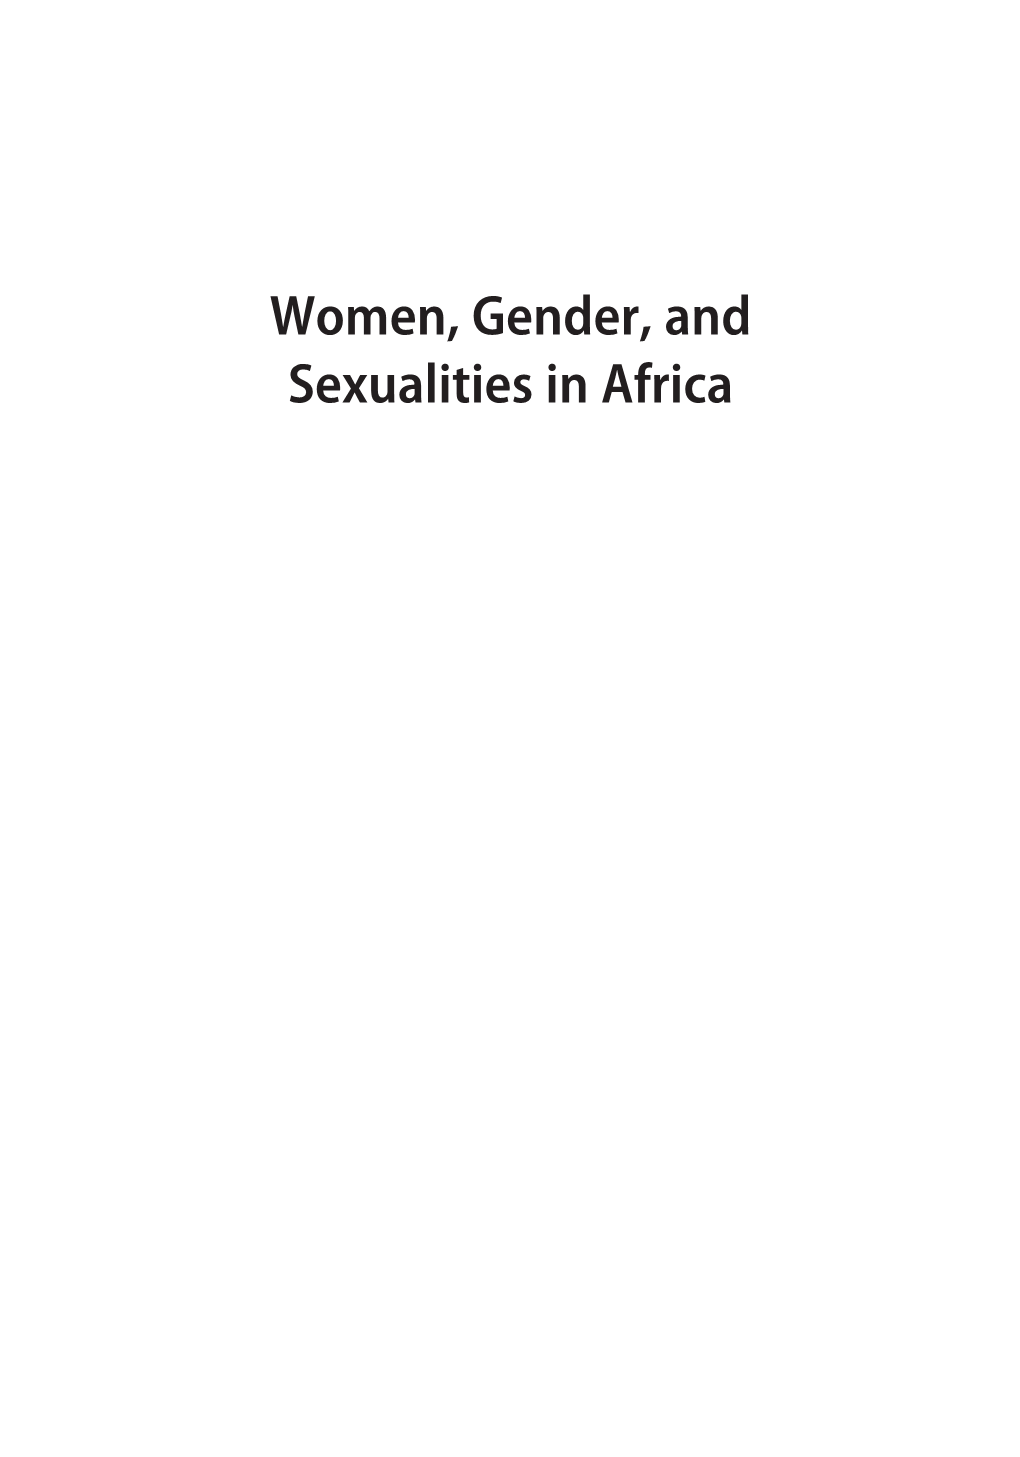 Women, Gender, and Sexualities in Africa Falola Amponsah 00 Fmt Cx1 12/17/12 5:34 PM Page Ii